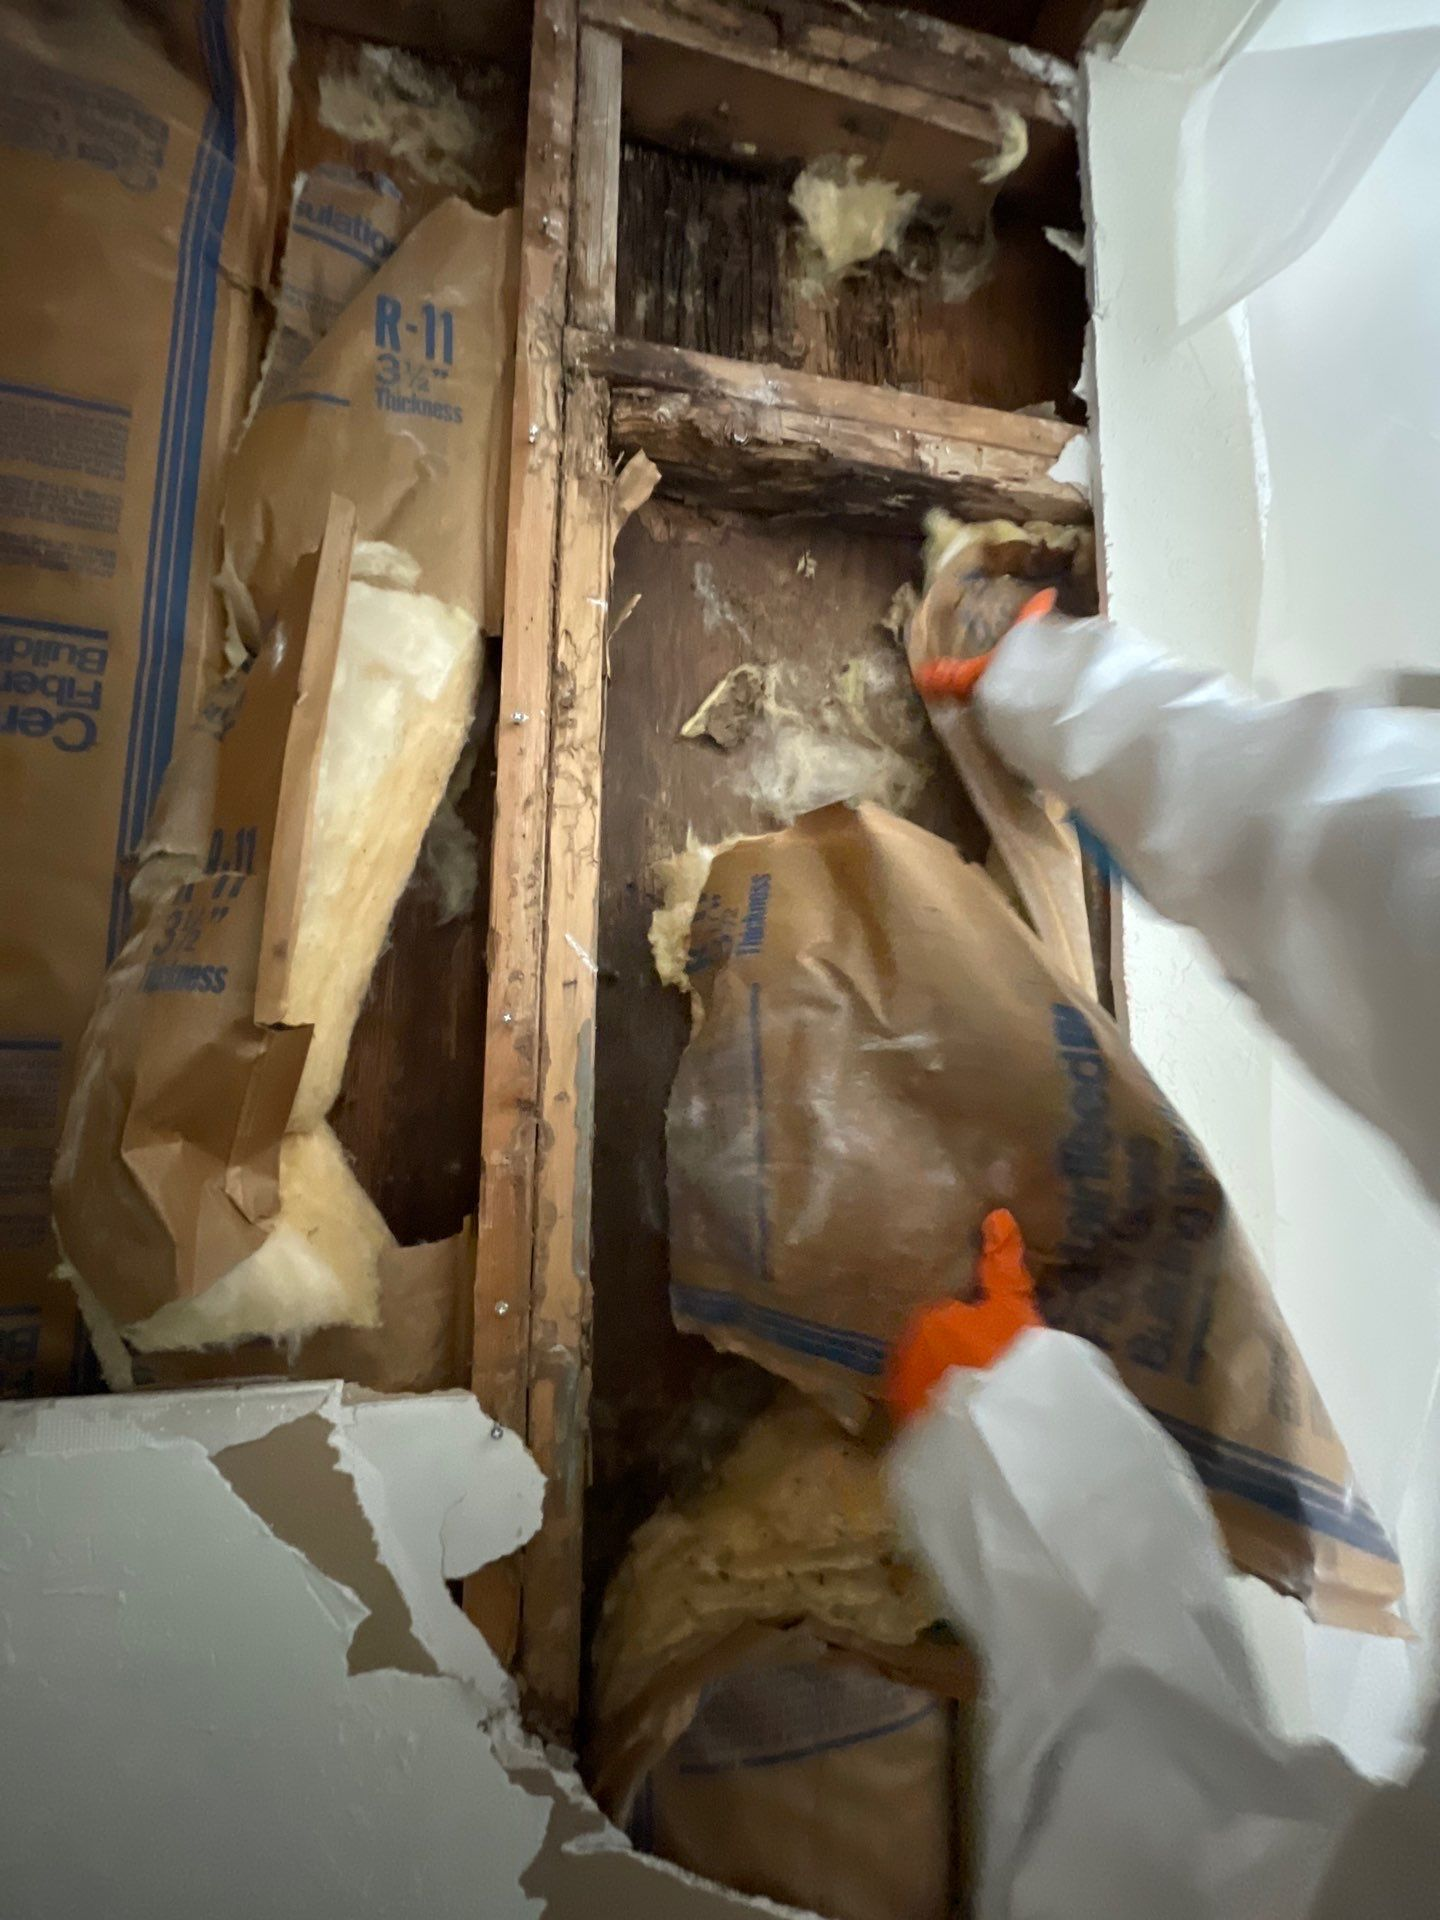 Mold remediation often includes removing insulation.